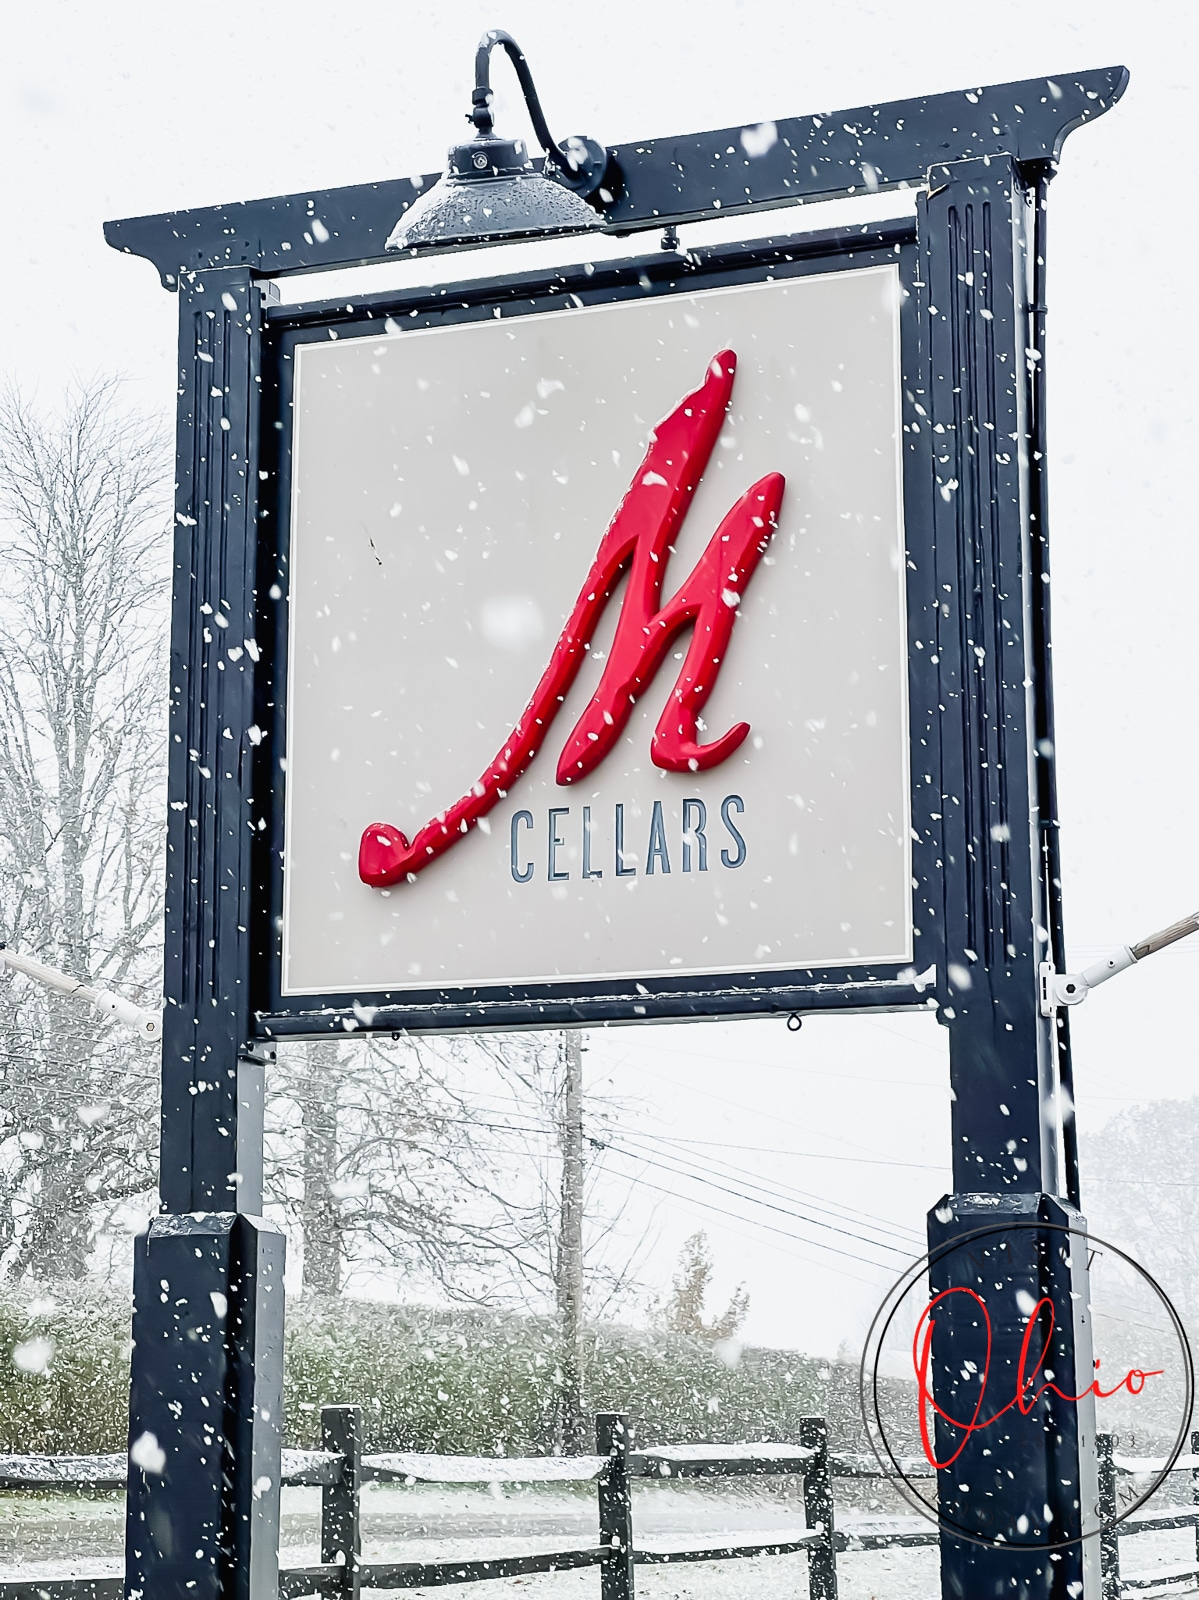 M Cellars sign in the snow